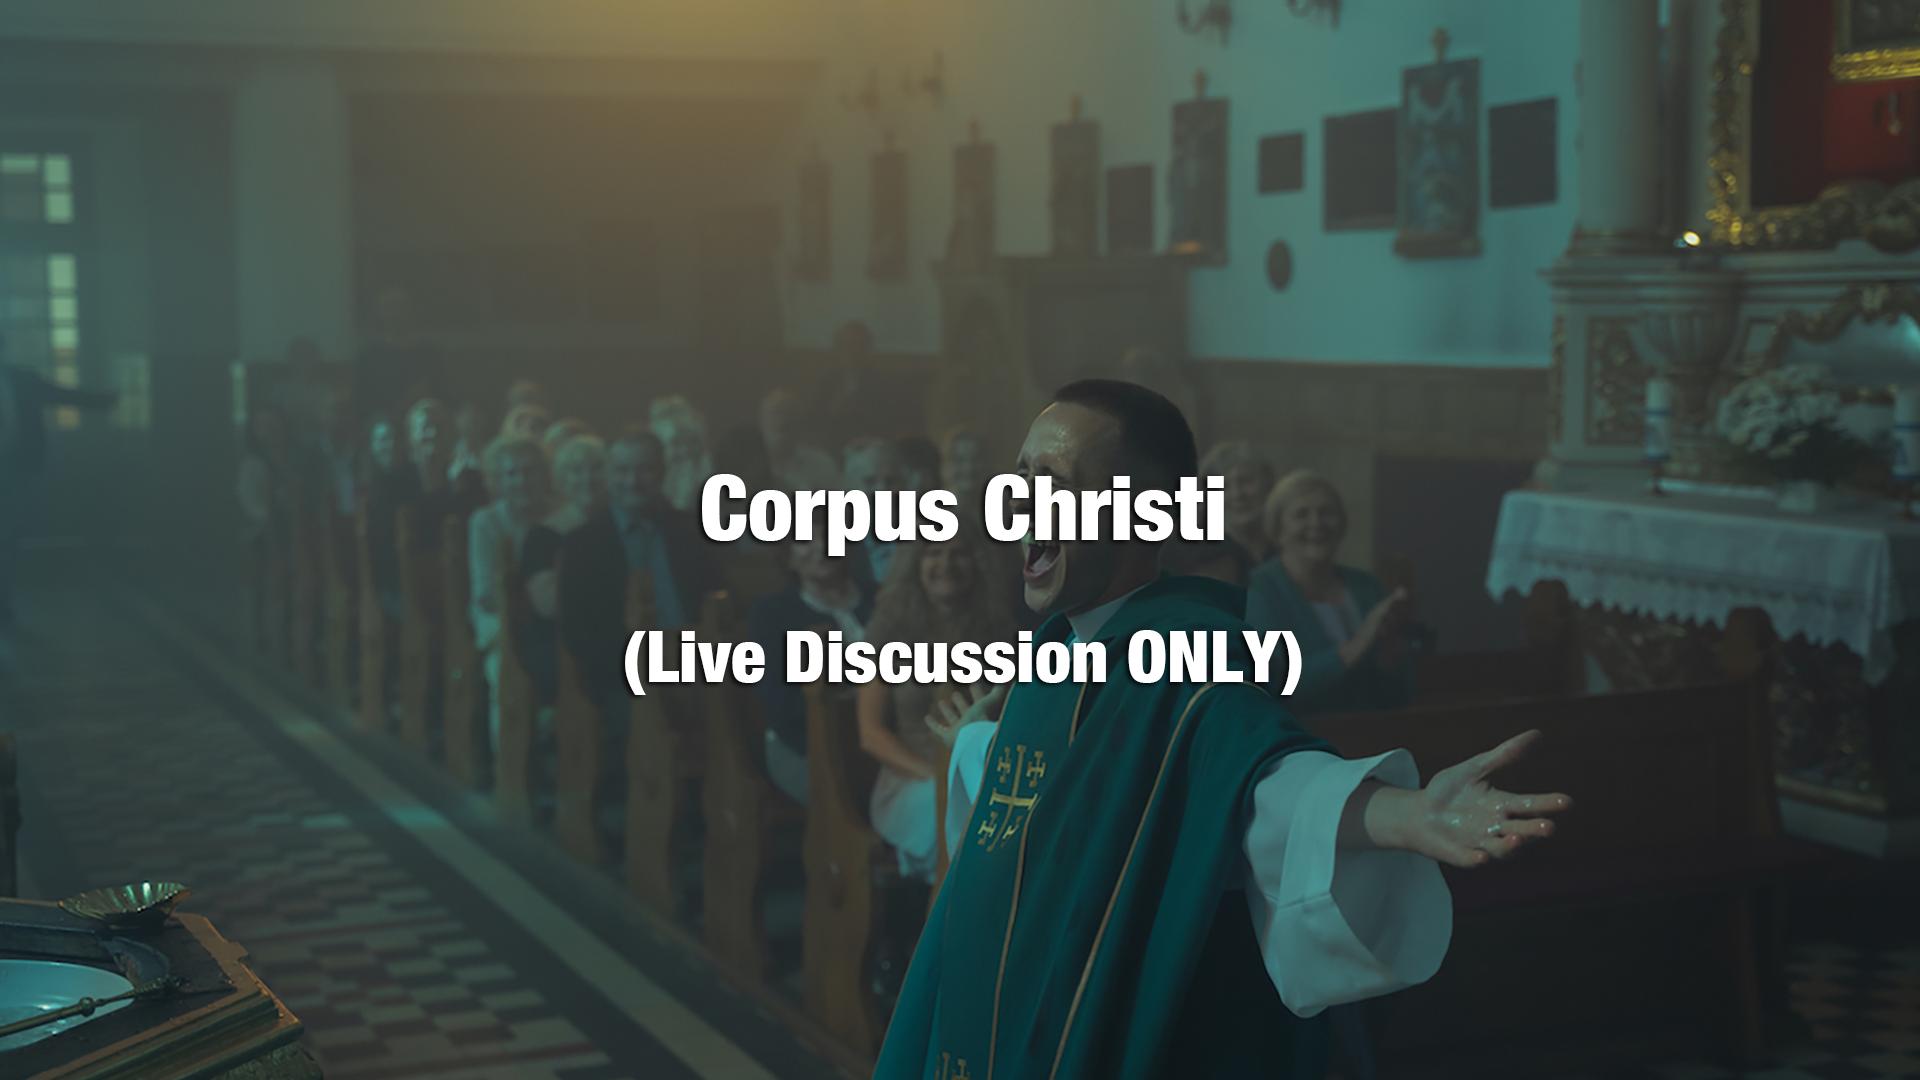 Corpus Christi Live Discussion with Director Jan Komasa [FREE LIVE DISCUSSION ONLY]